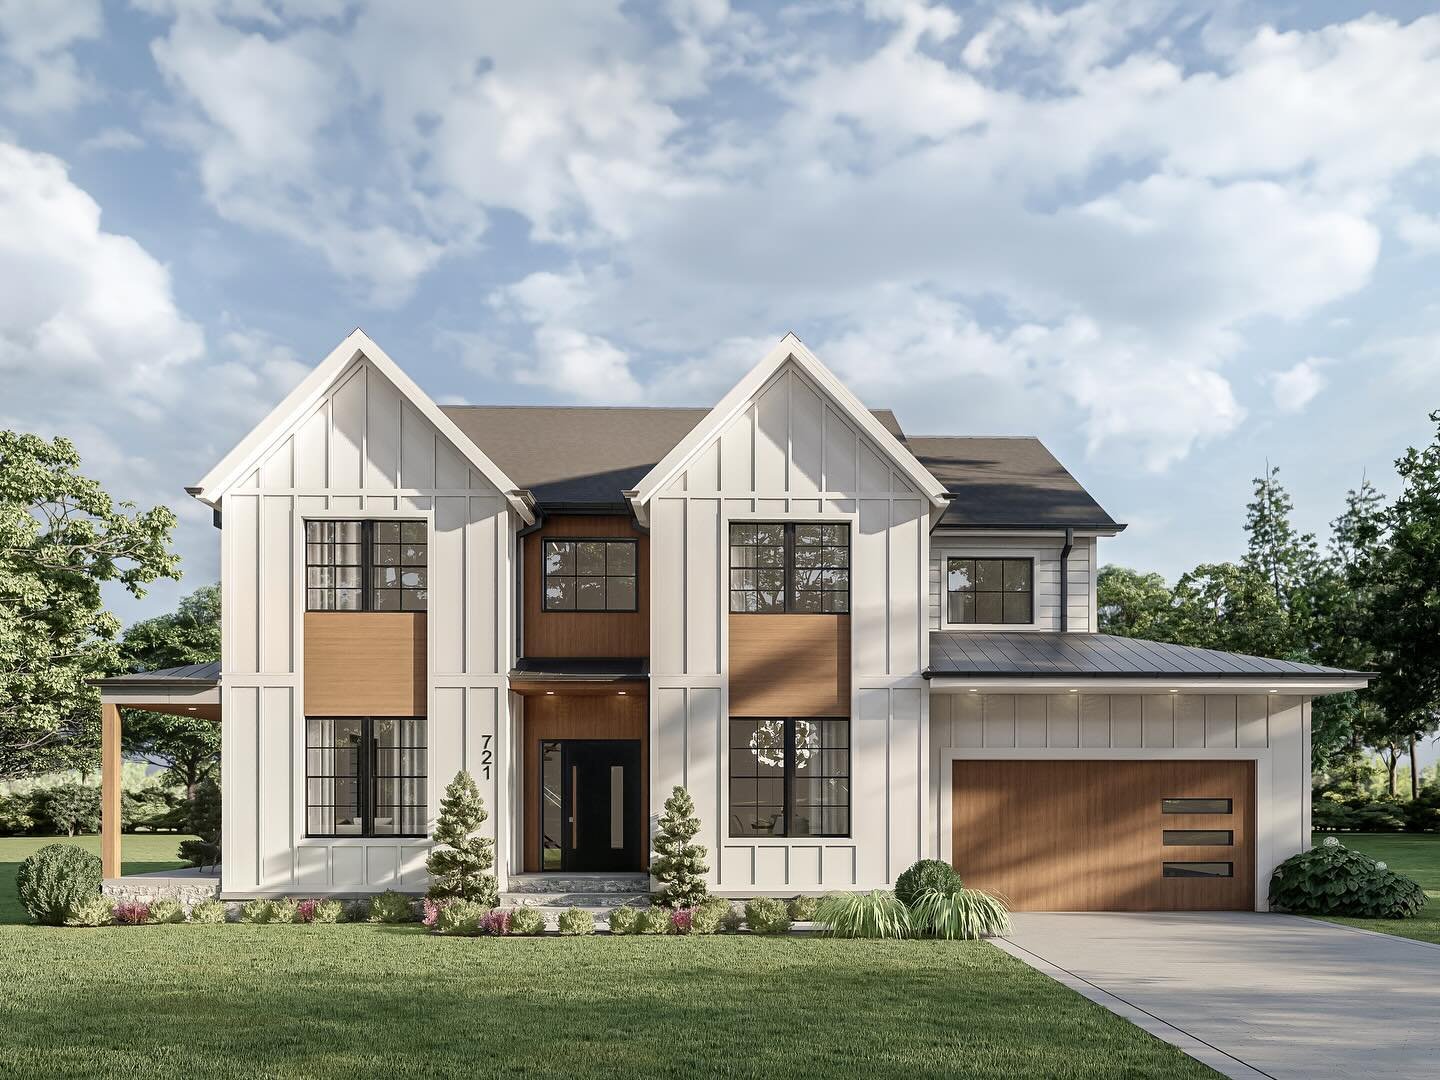 Looking back on this transitional style new build in Westfield. The wood-clad entryway, nestled between two symmetrical gables, promises a welcoming embrace of natural warmth for the homeowners each time they step into their home.

Architect: Space&a